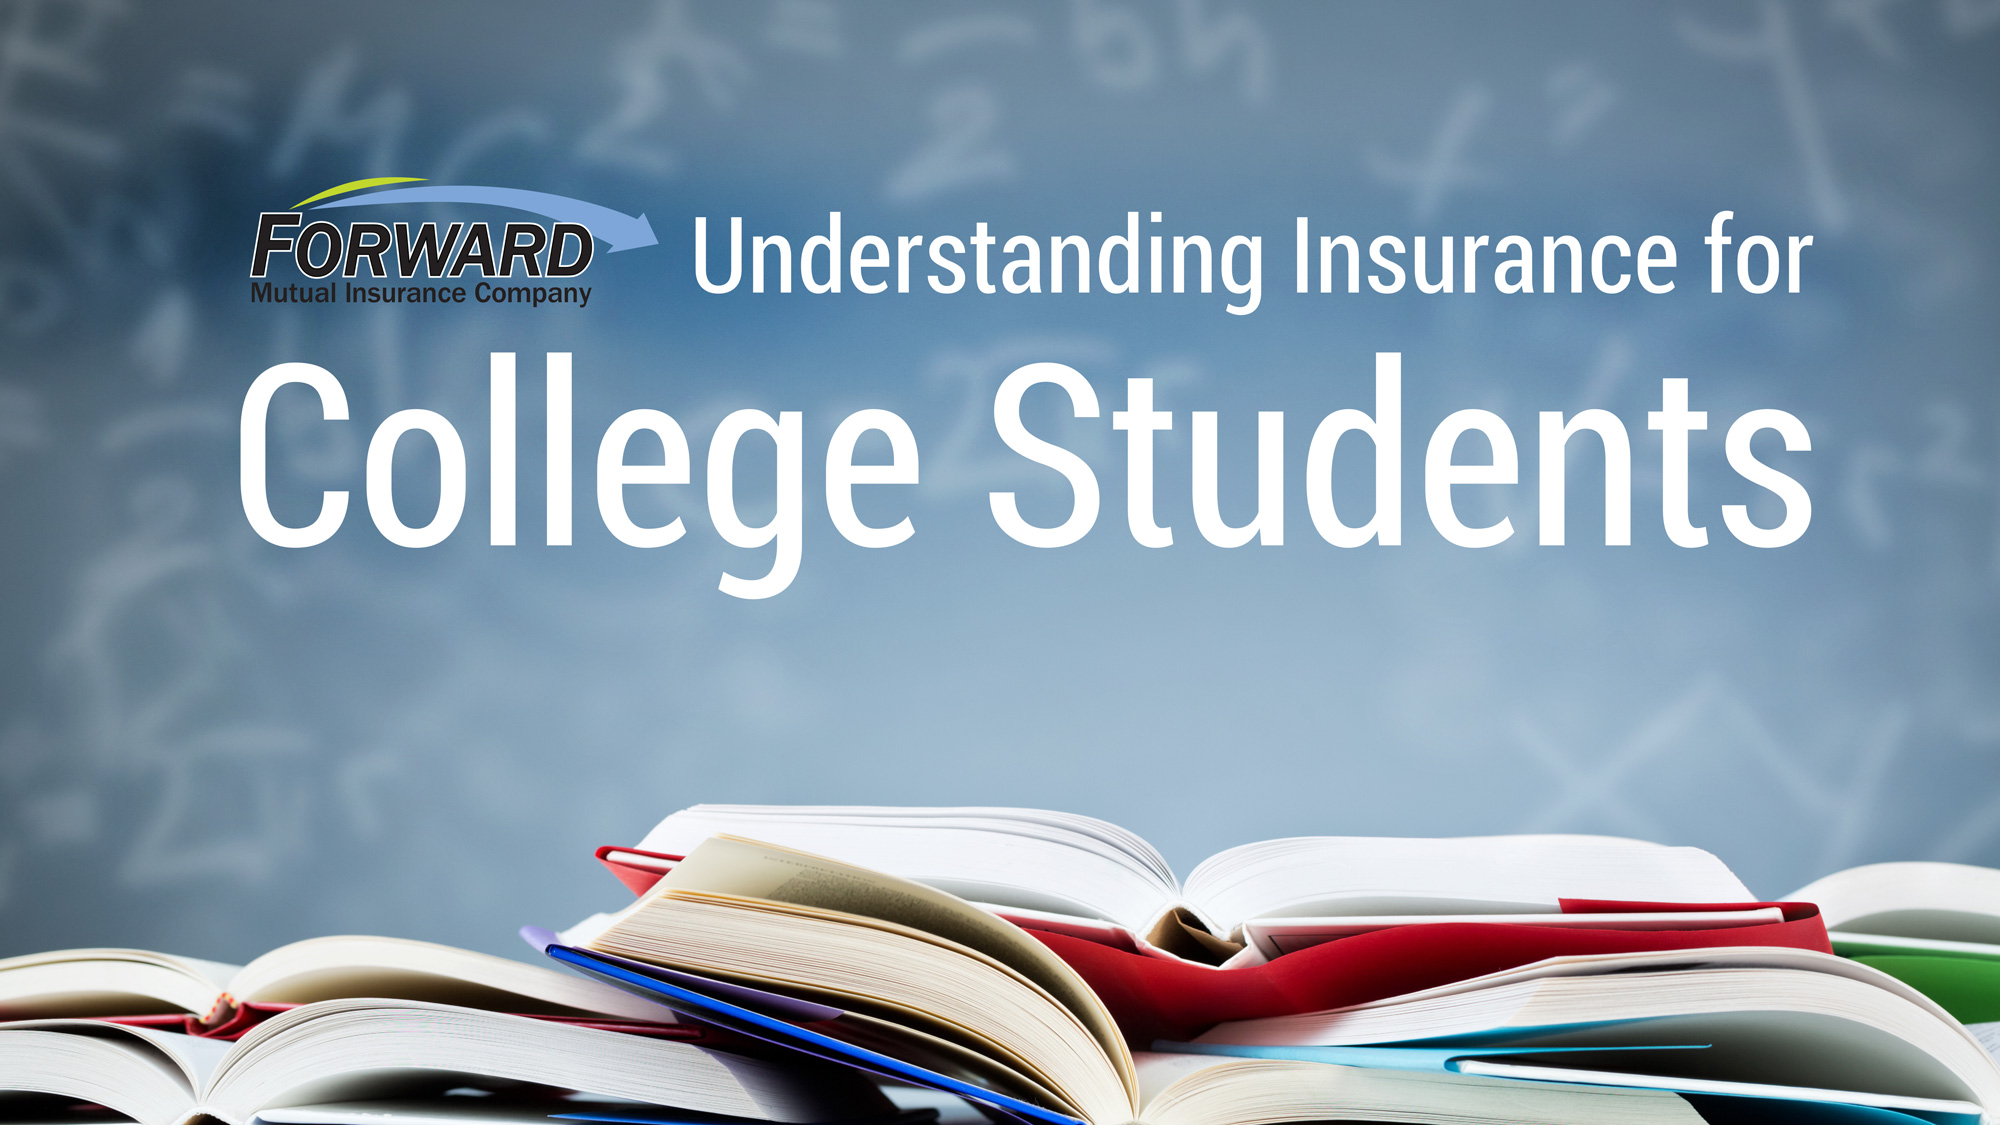 Forward Mutual helps parents understand insurance for college students